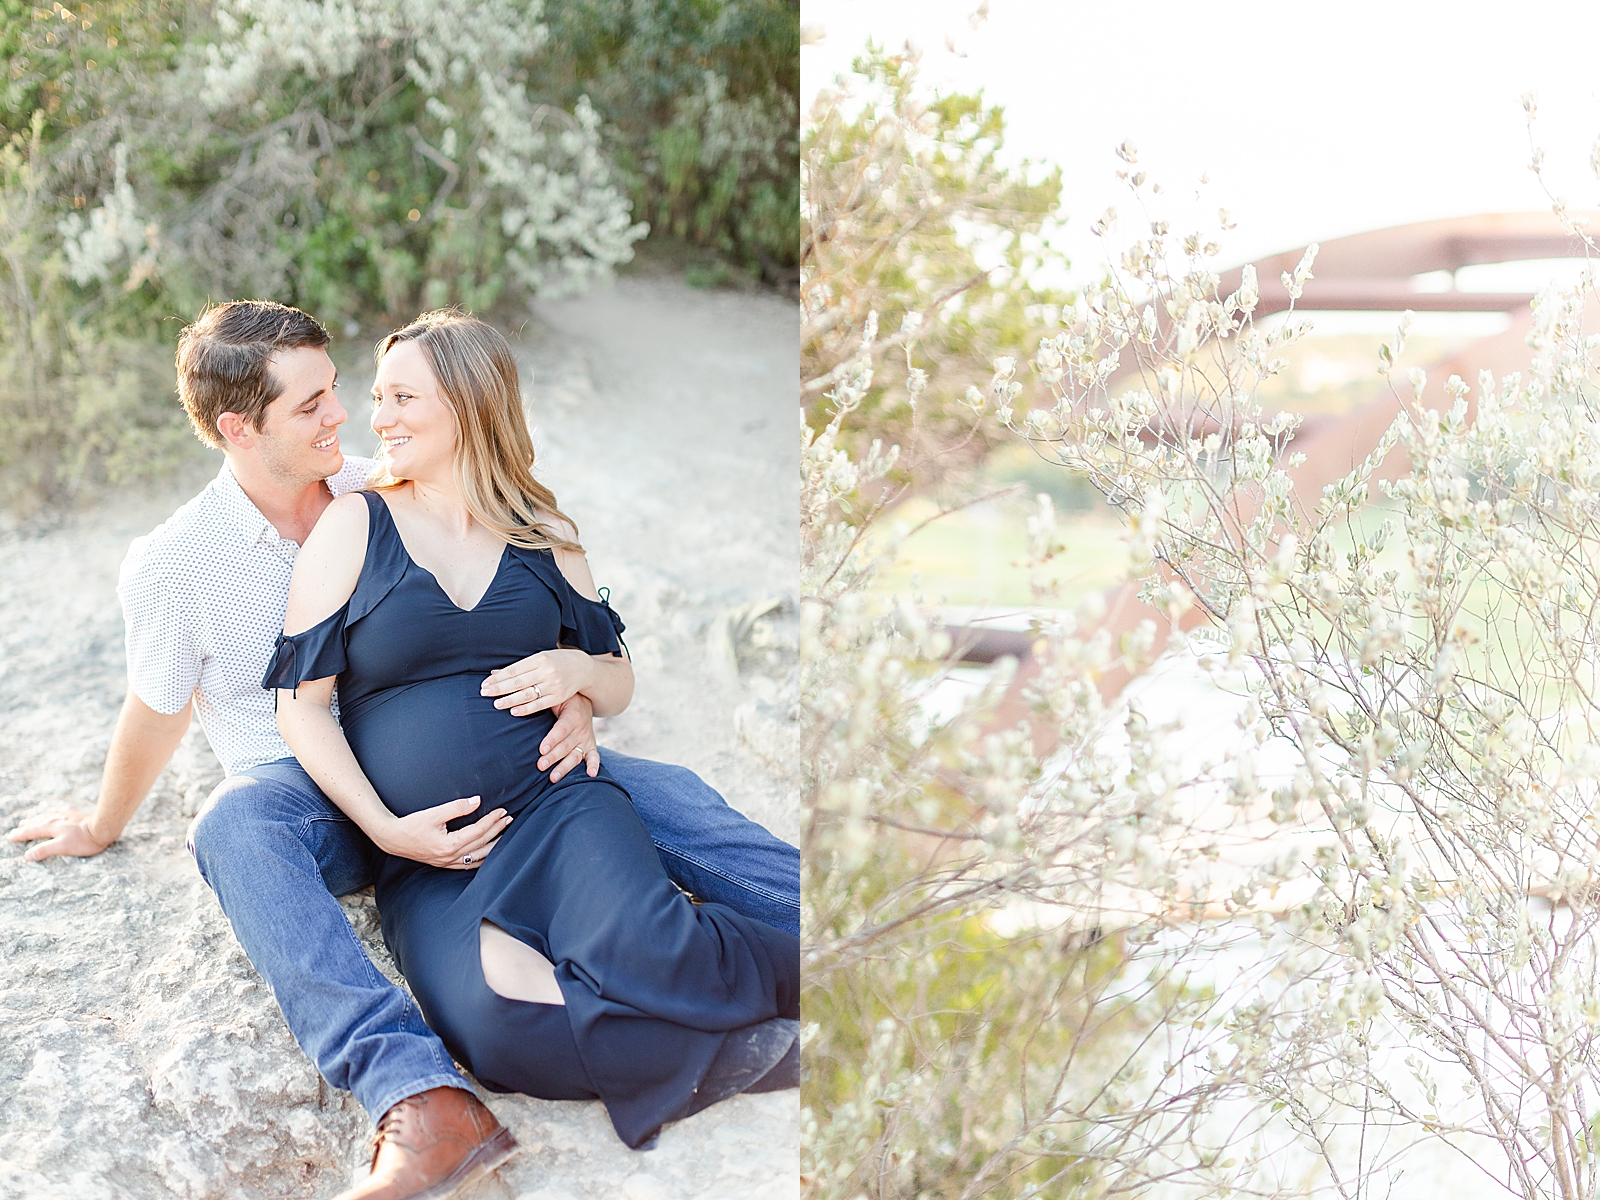 detail photo of the 360 bridge in Austin and photo of expecting mom and dad sitting on the ground holding baby bump looking and smiling at one another